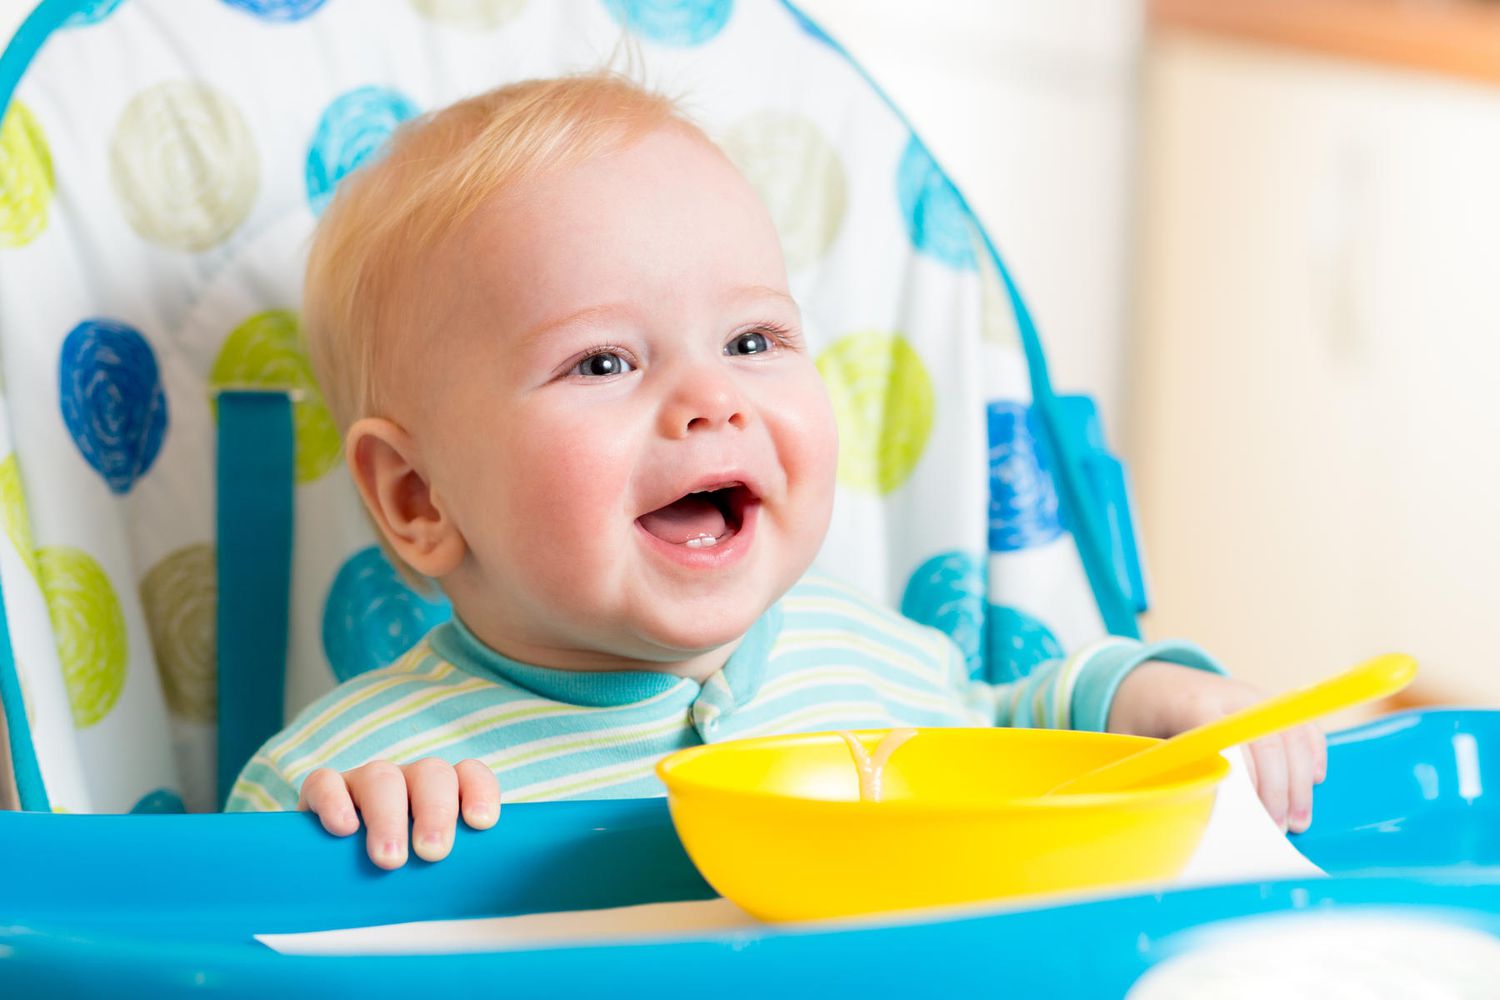 when to feed baby cereal